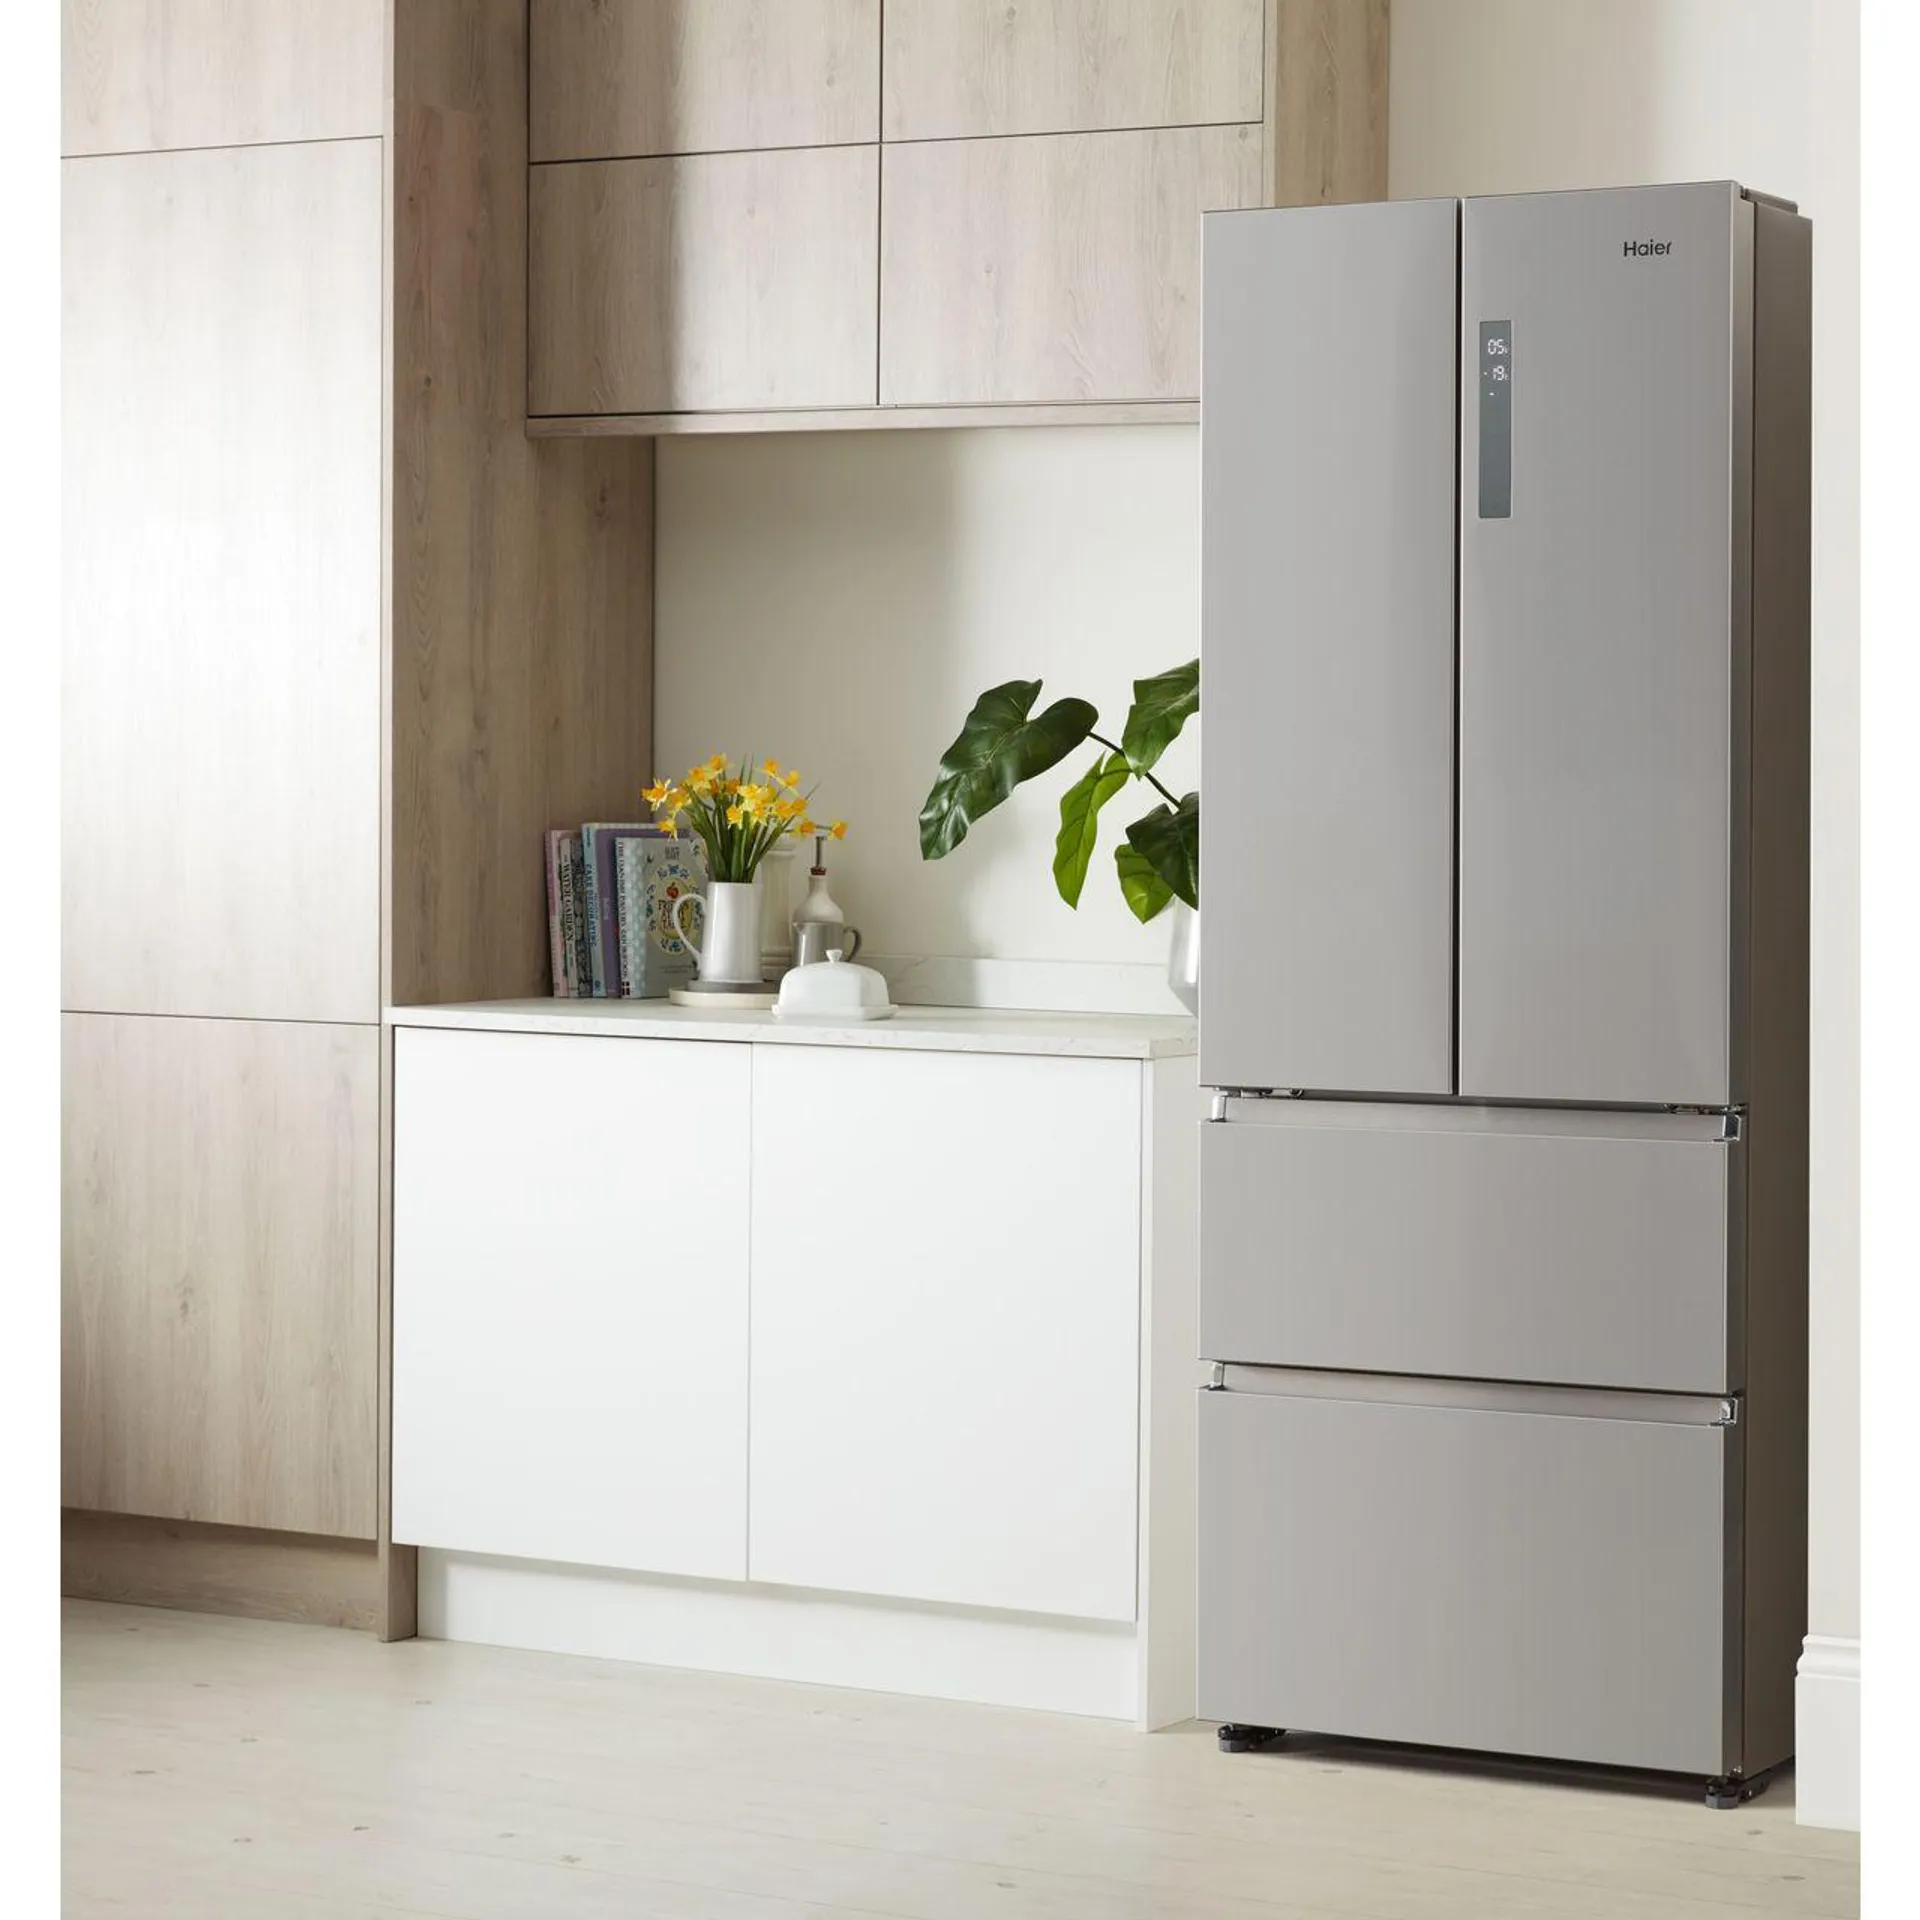 Haier HB15FPAA 60/40 Total No Frost Fridge Freezer - Stainless Steel Effect - F Rated